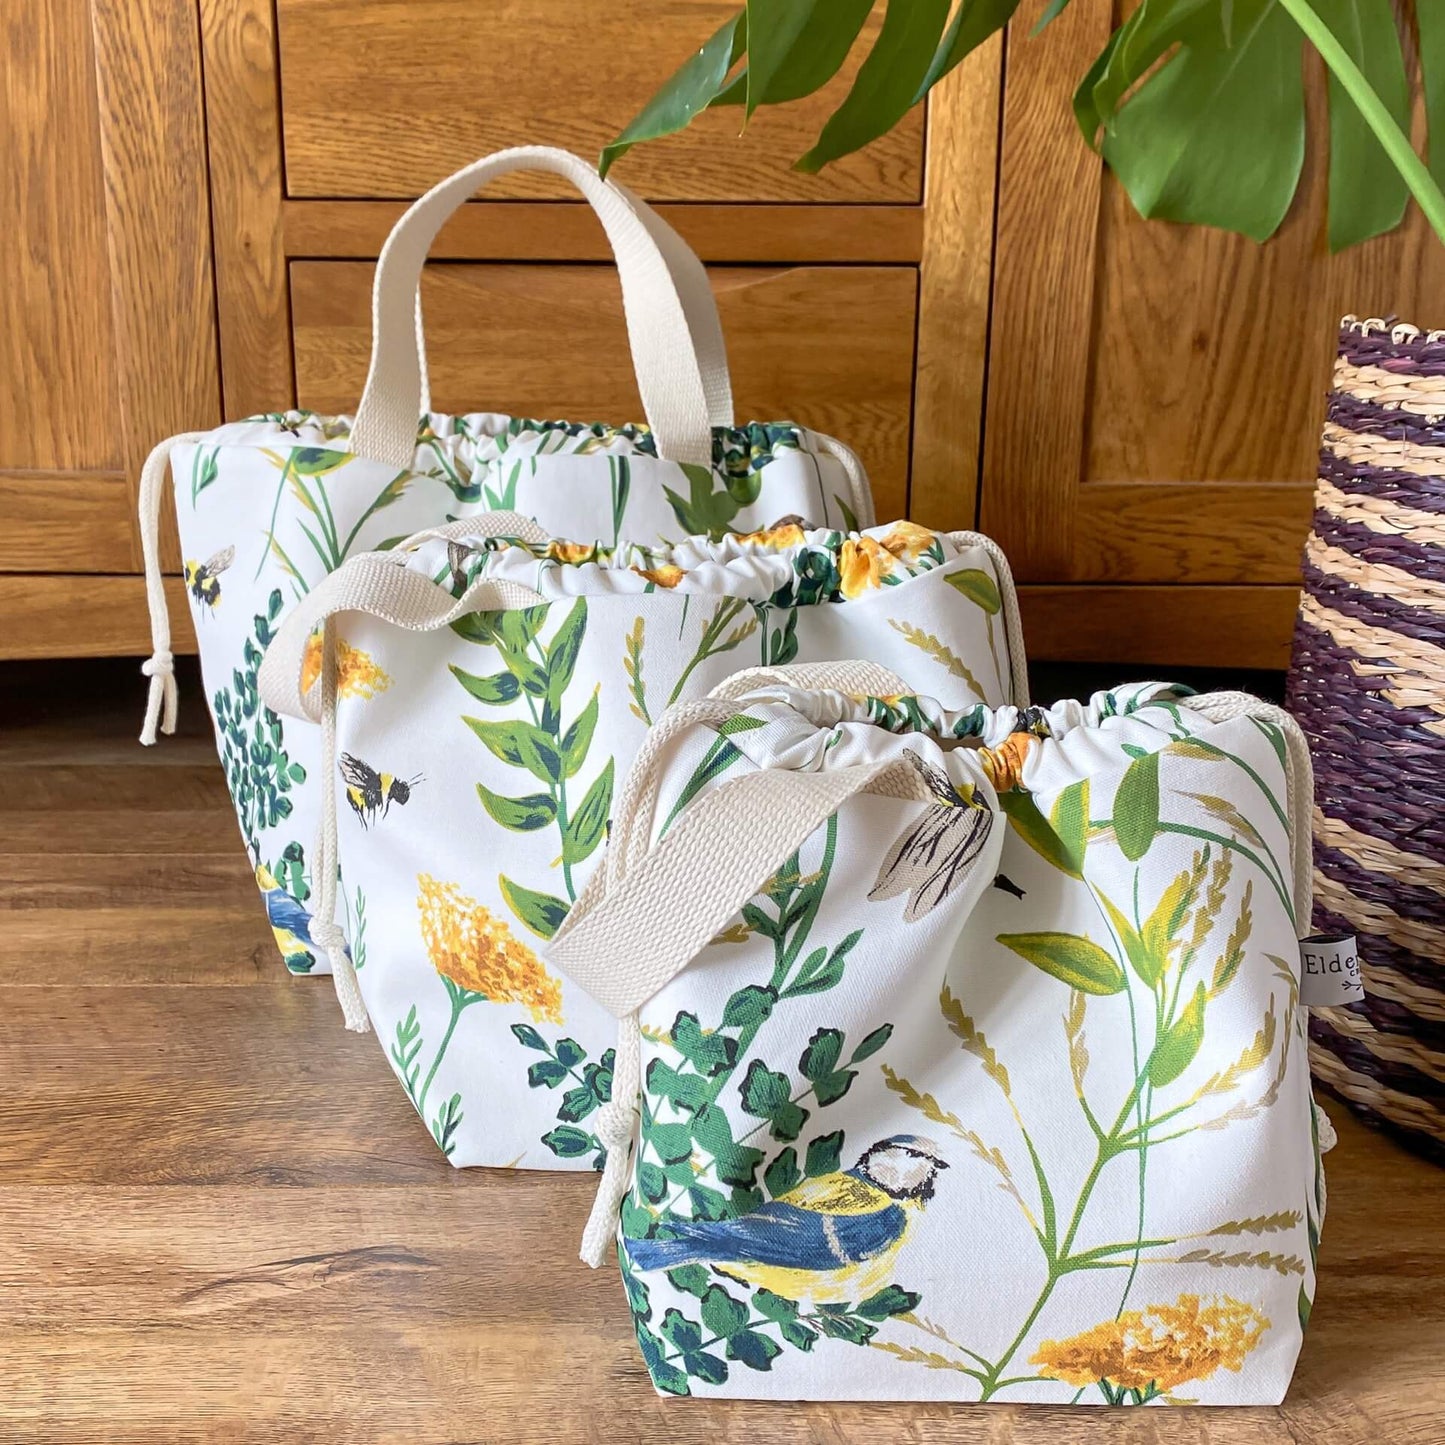 Three knitting project bags sit together with the smallest at the front and the largest at the back. The bags are made from a fabric that shows a summery scene with foliage in bloom, bees and birds. 